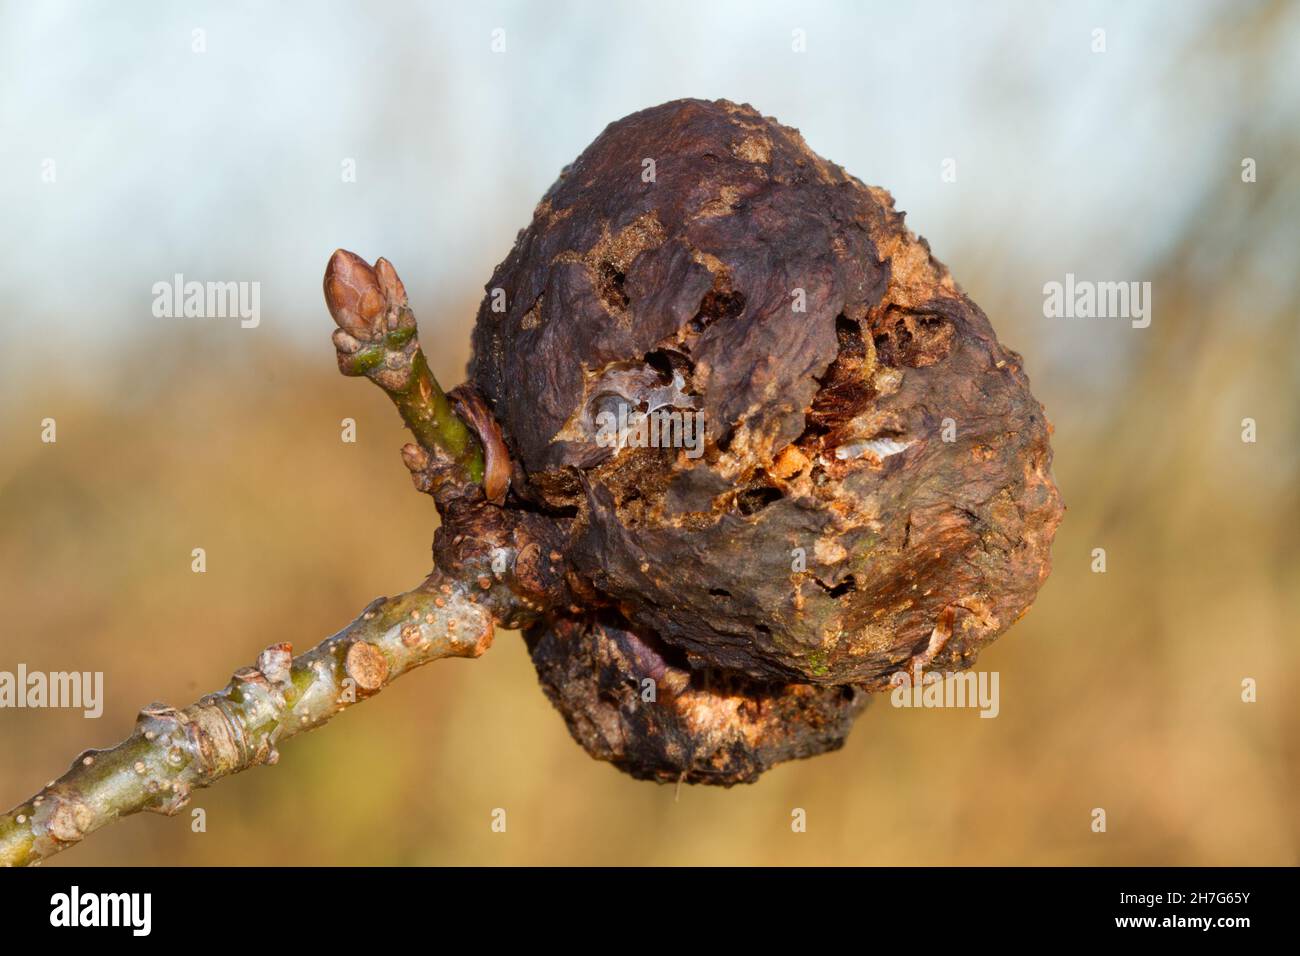 Old gall of Biothiza pallida, a gall wasp, on a twig with a leaf bud of an Oak Stock Photo